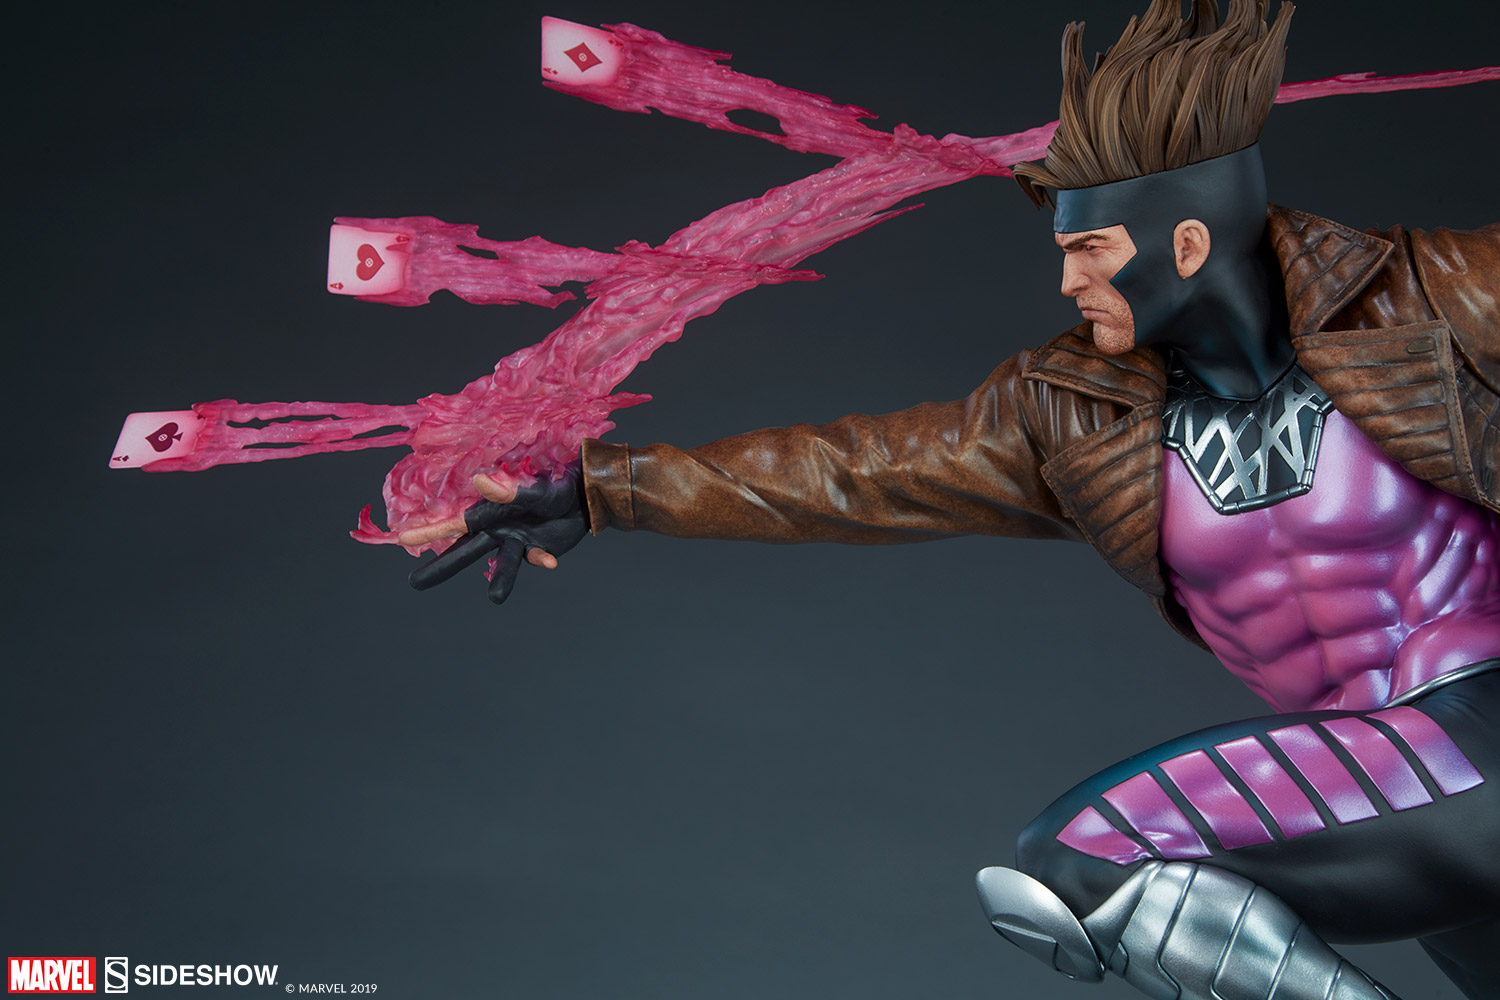 https://www.sideshow.com/storage/product-images/300727/gambit_marvel_gallery_5d66e7d9e4b7a.jpg